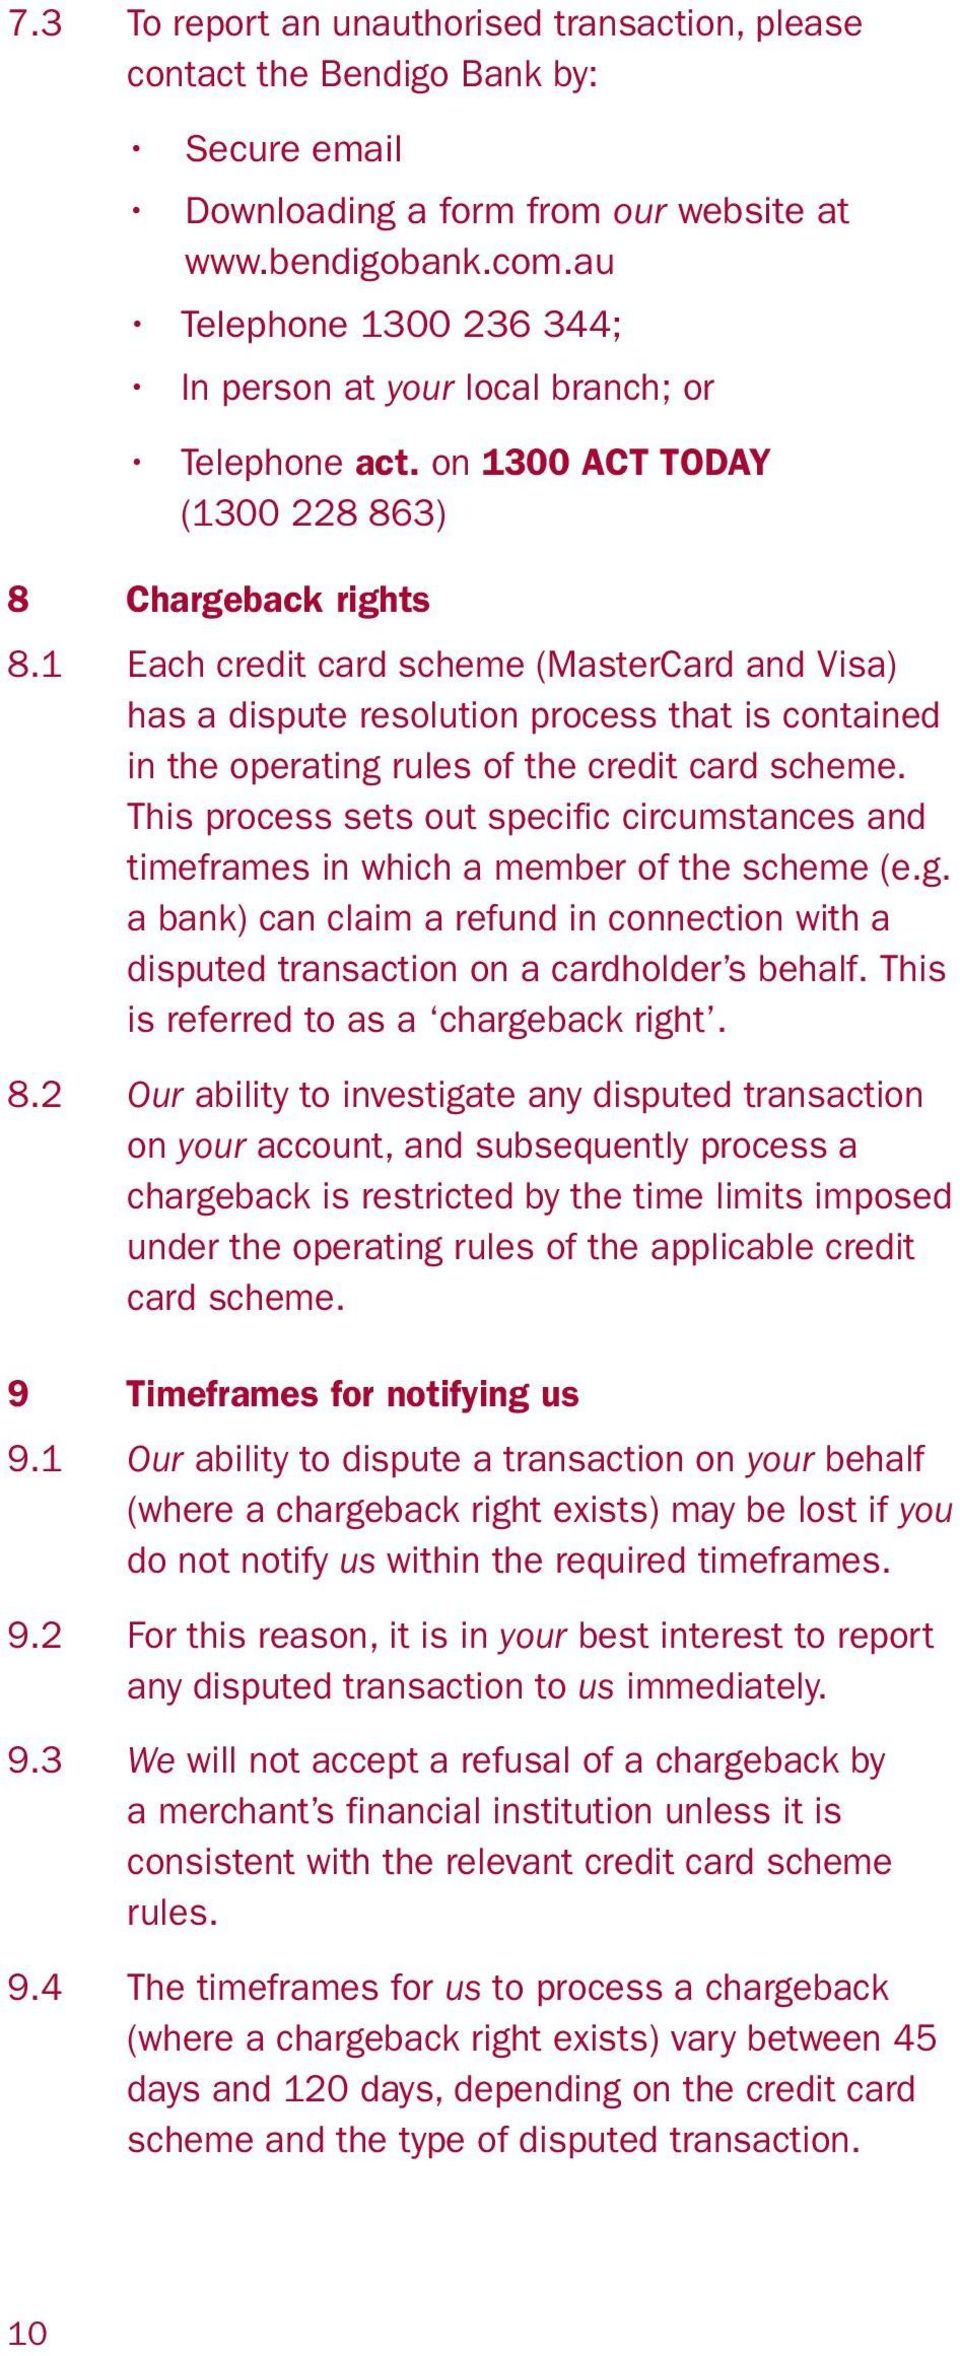 1 Each credit card scheme (MasterCard and Visa) has a dispute resolution process that is contained in the operating rules of the credit card scheme.